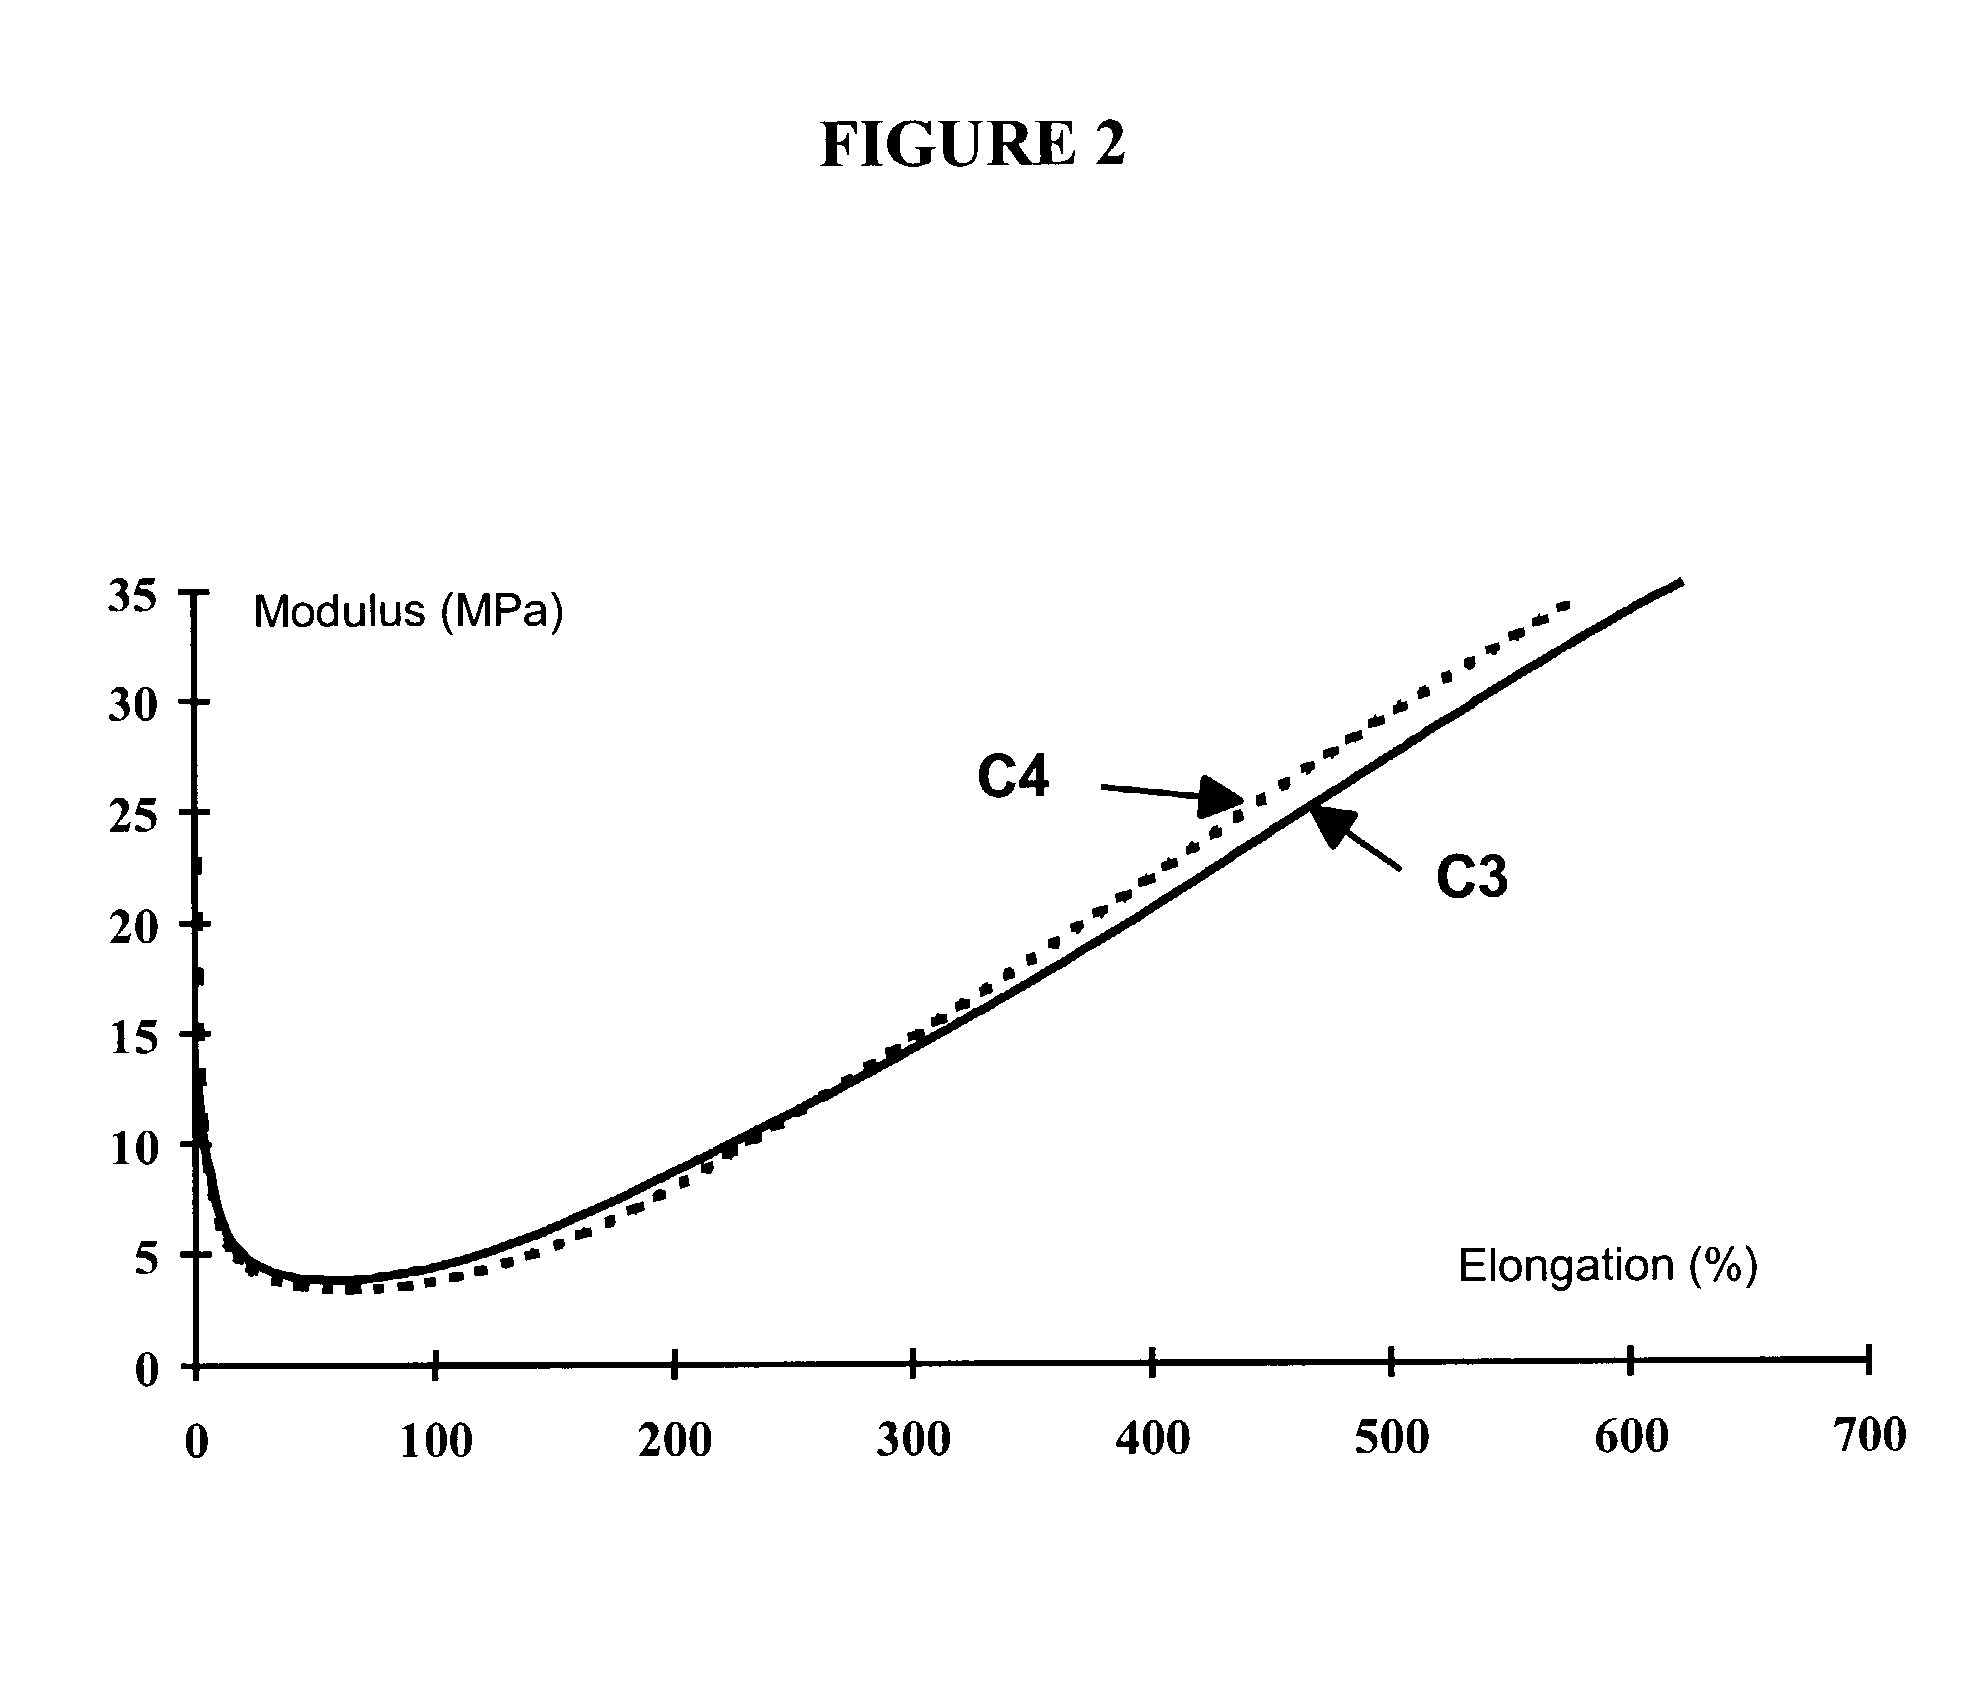 Rubber compositions for use in tires, comprising a (white filler/elastomer) coupling agent with an ester function